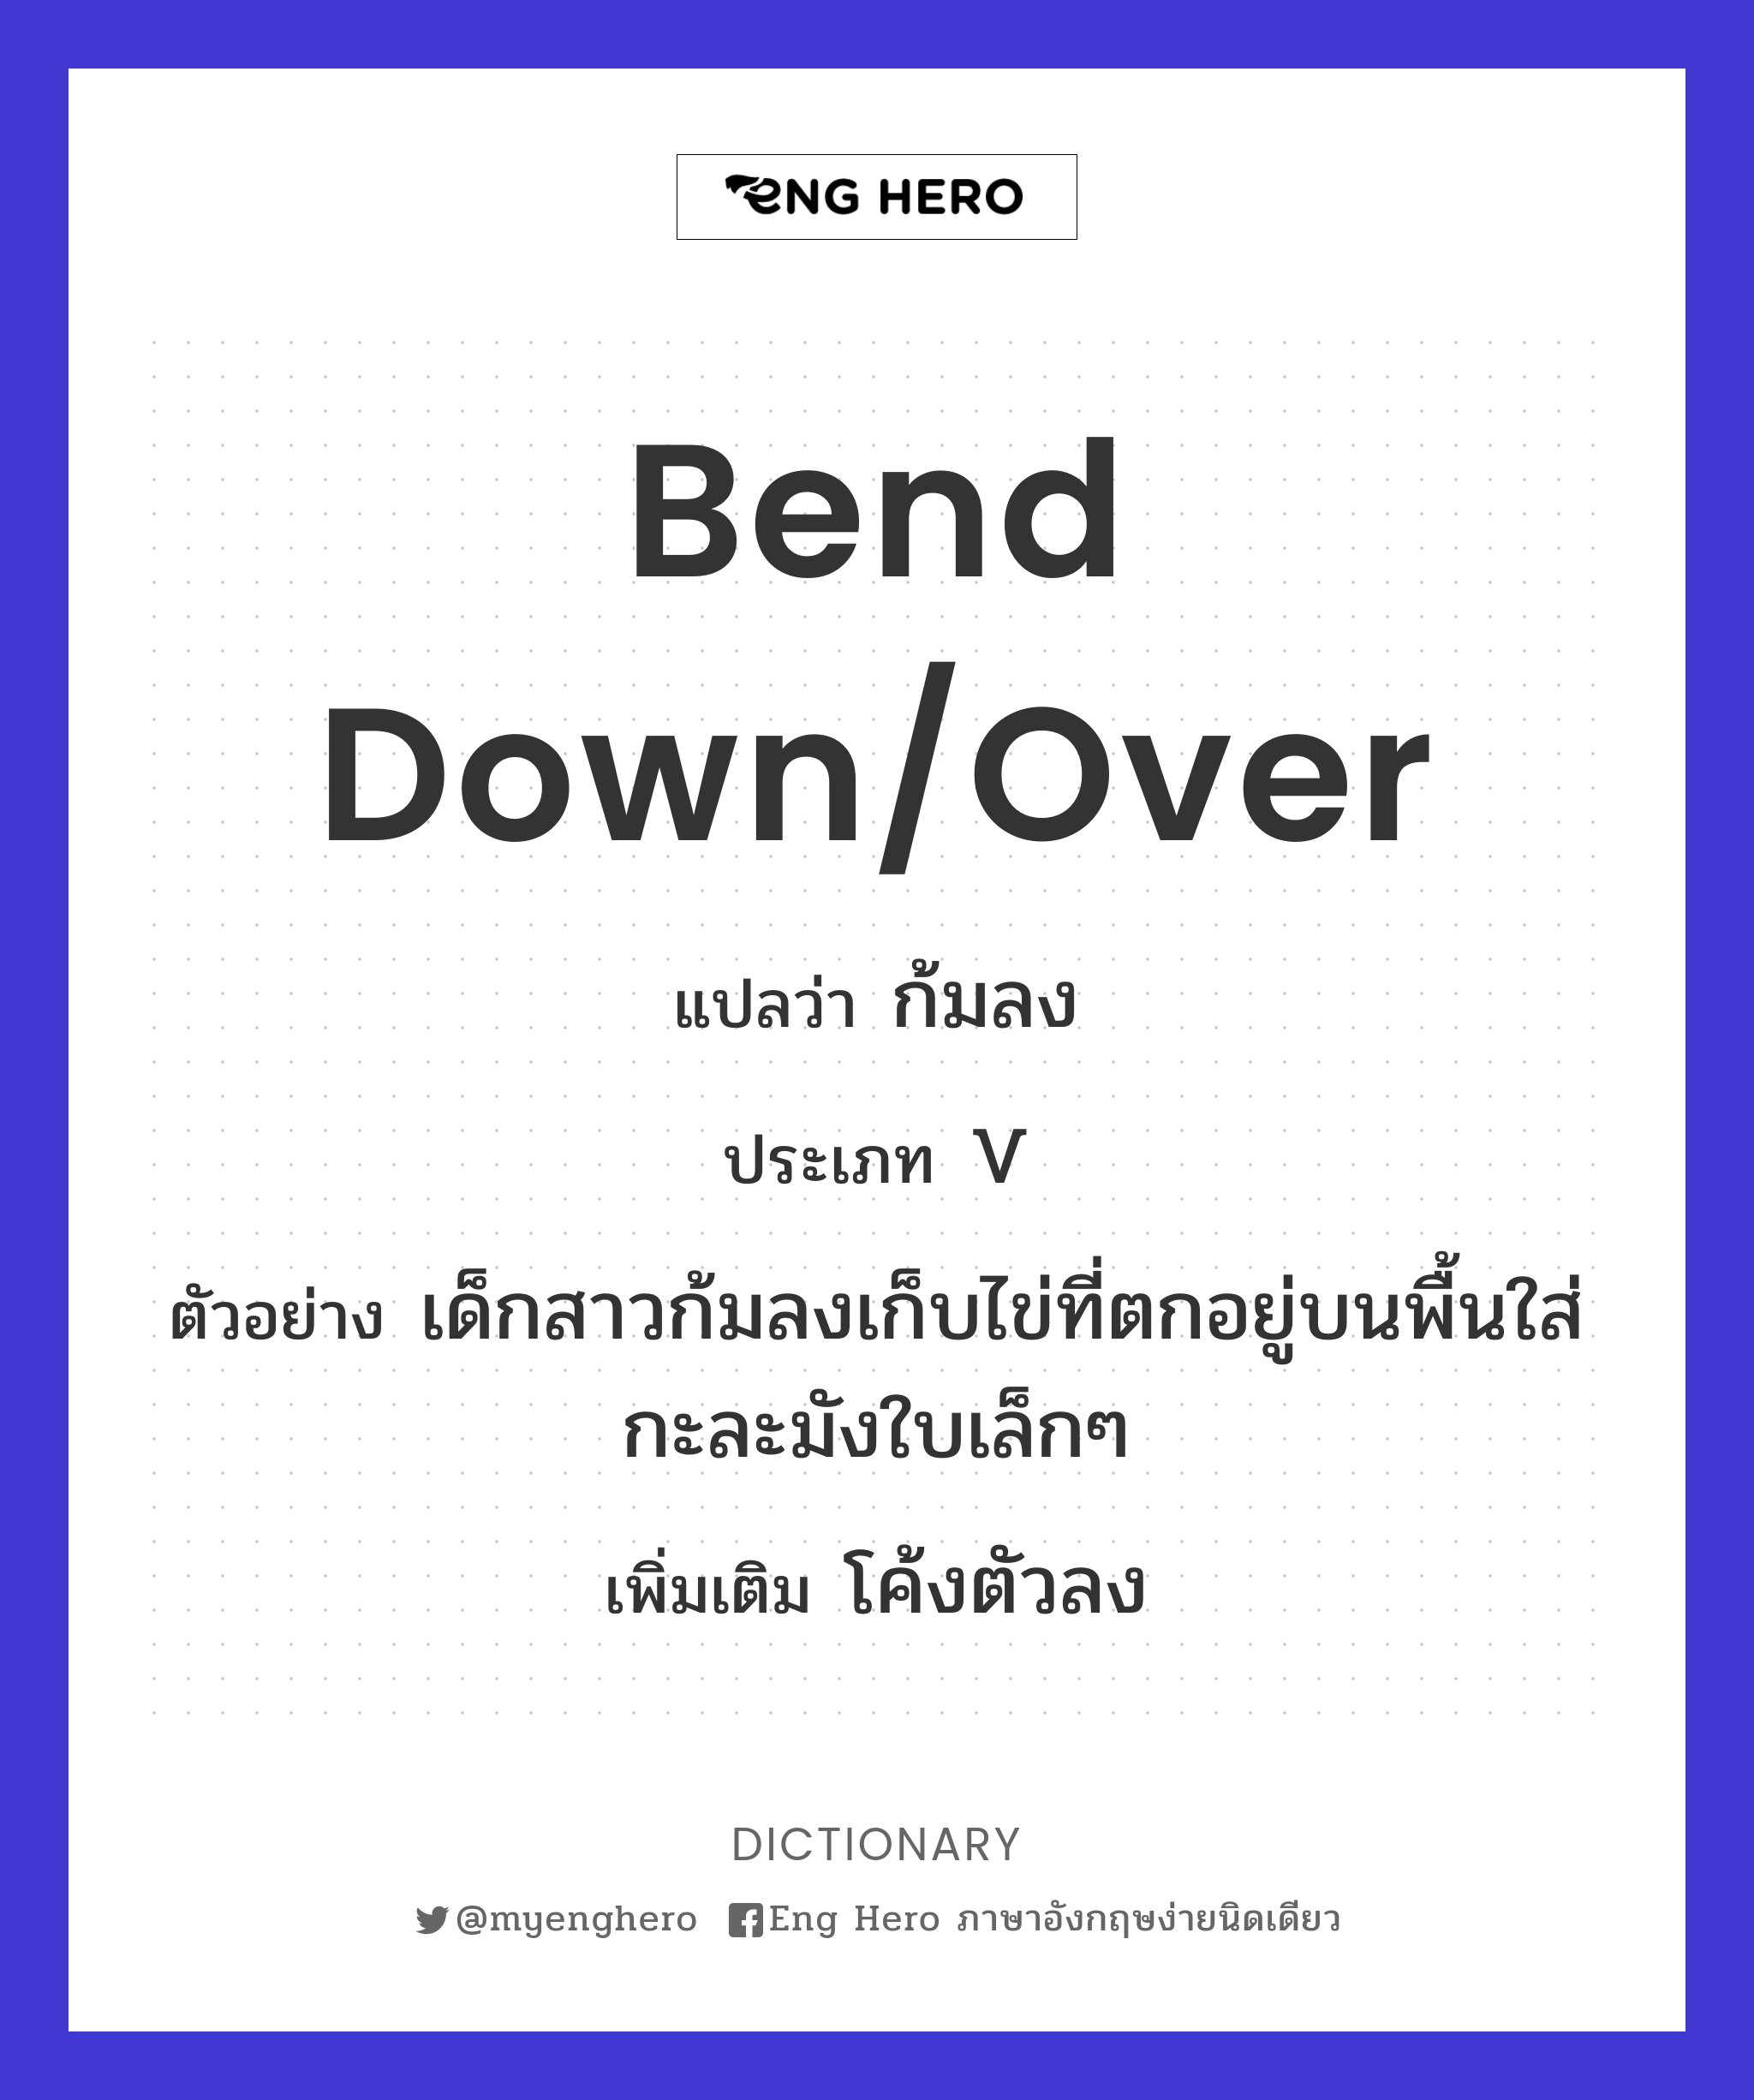 bend down/over